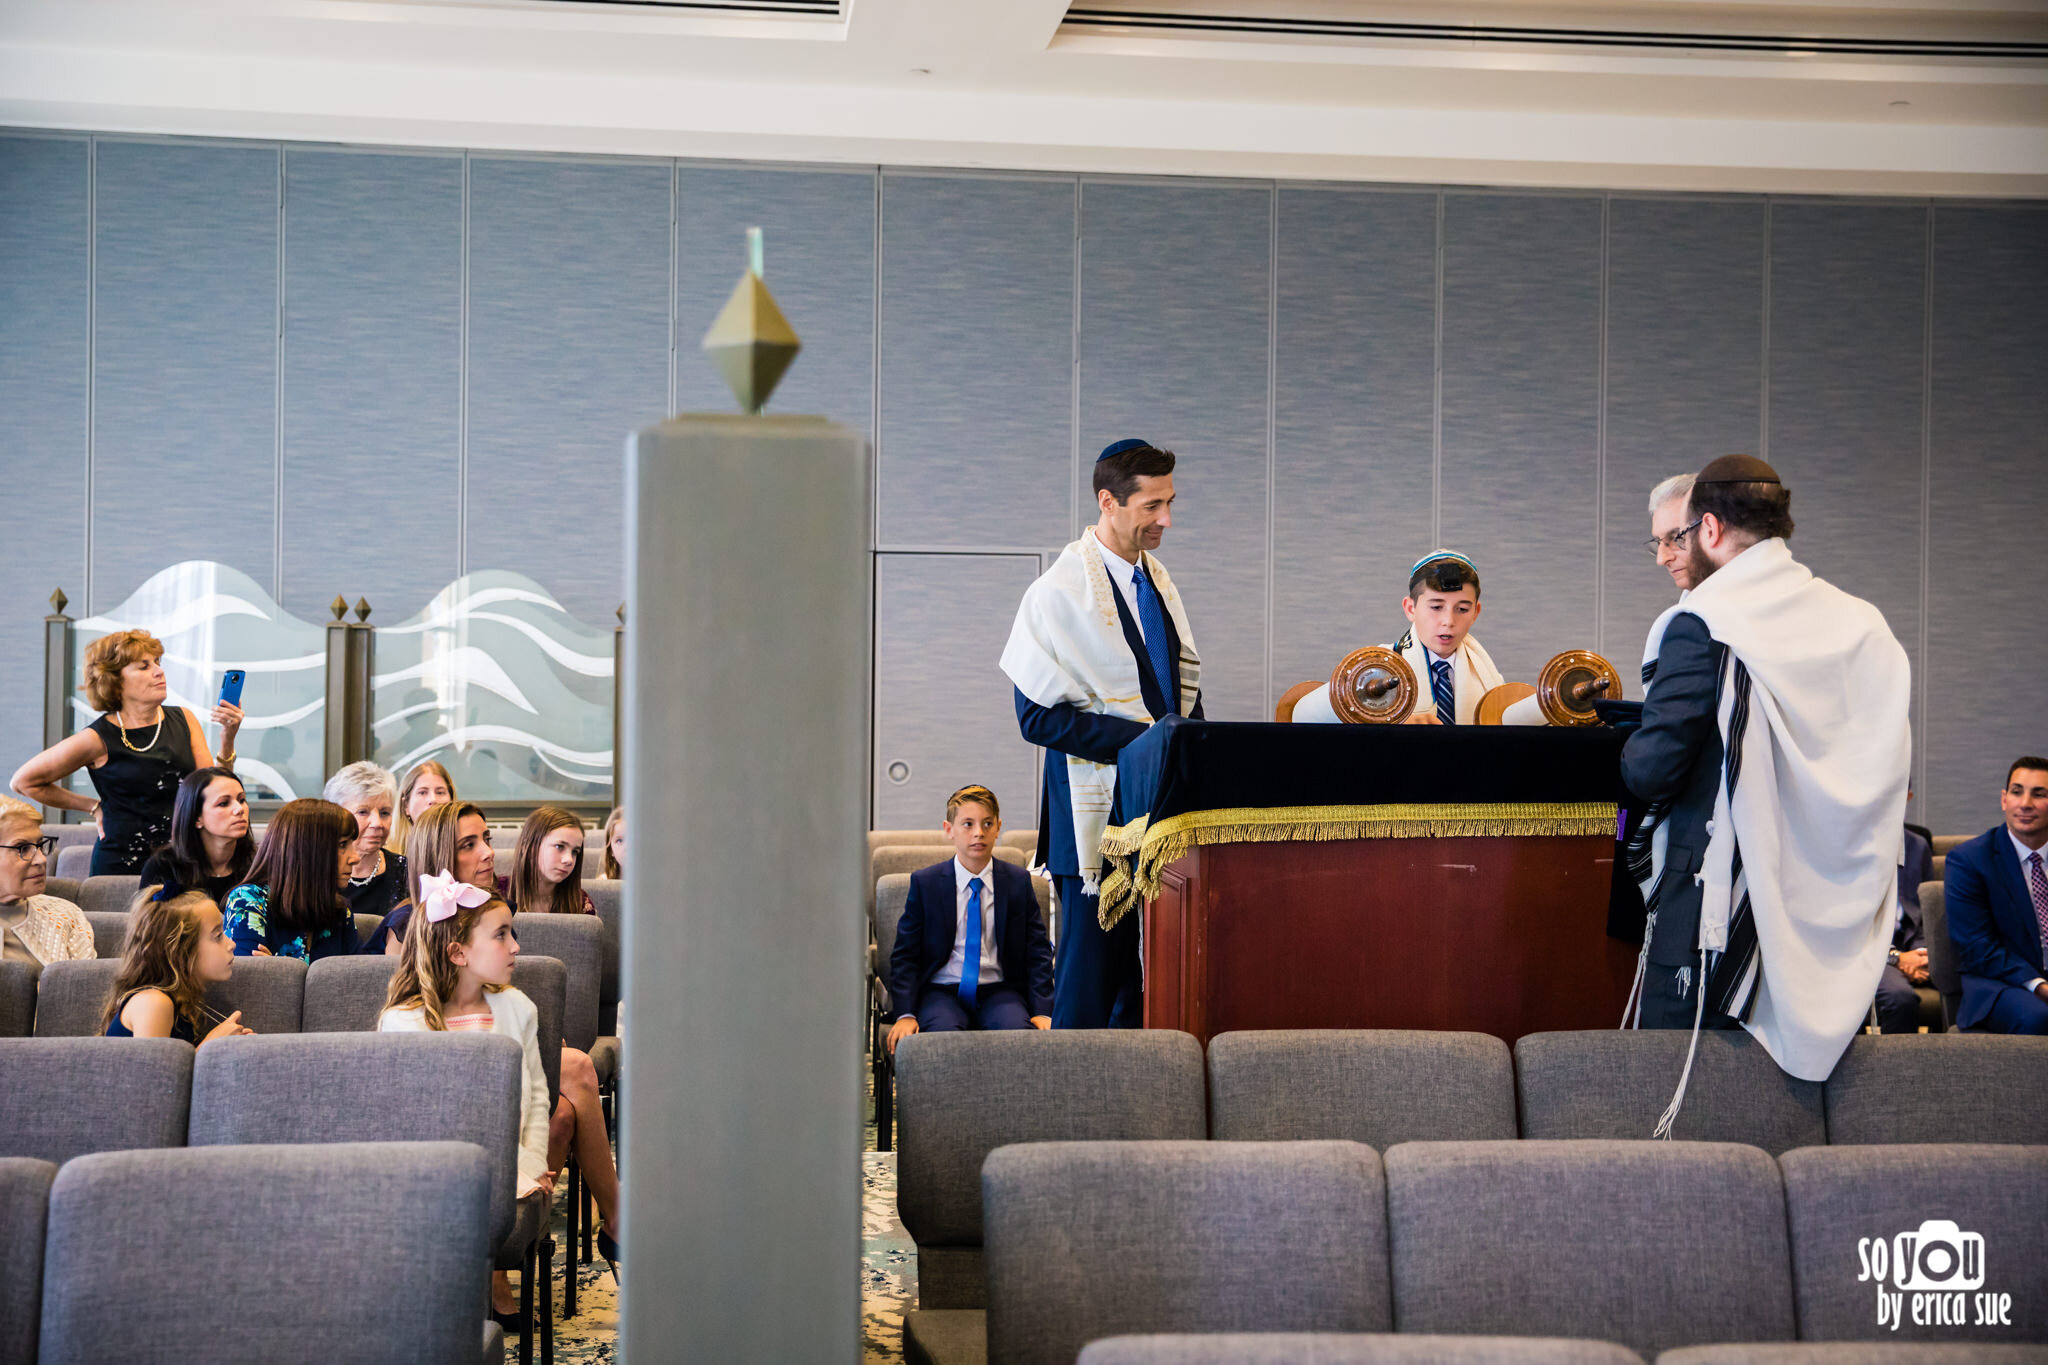 13-so-you-by-erica-sue-chabad-parkland-bar-mitzvah-photographer-.JPG